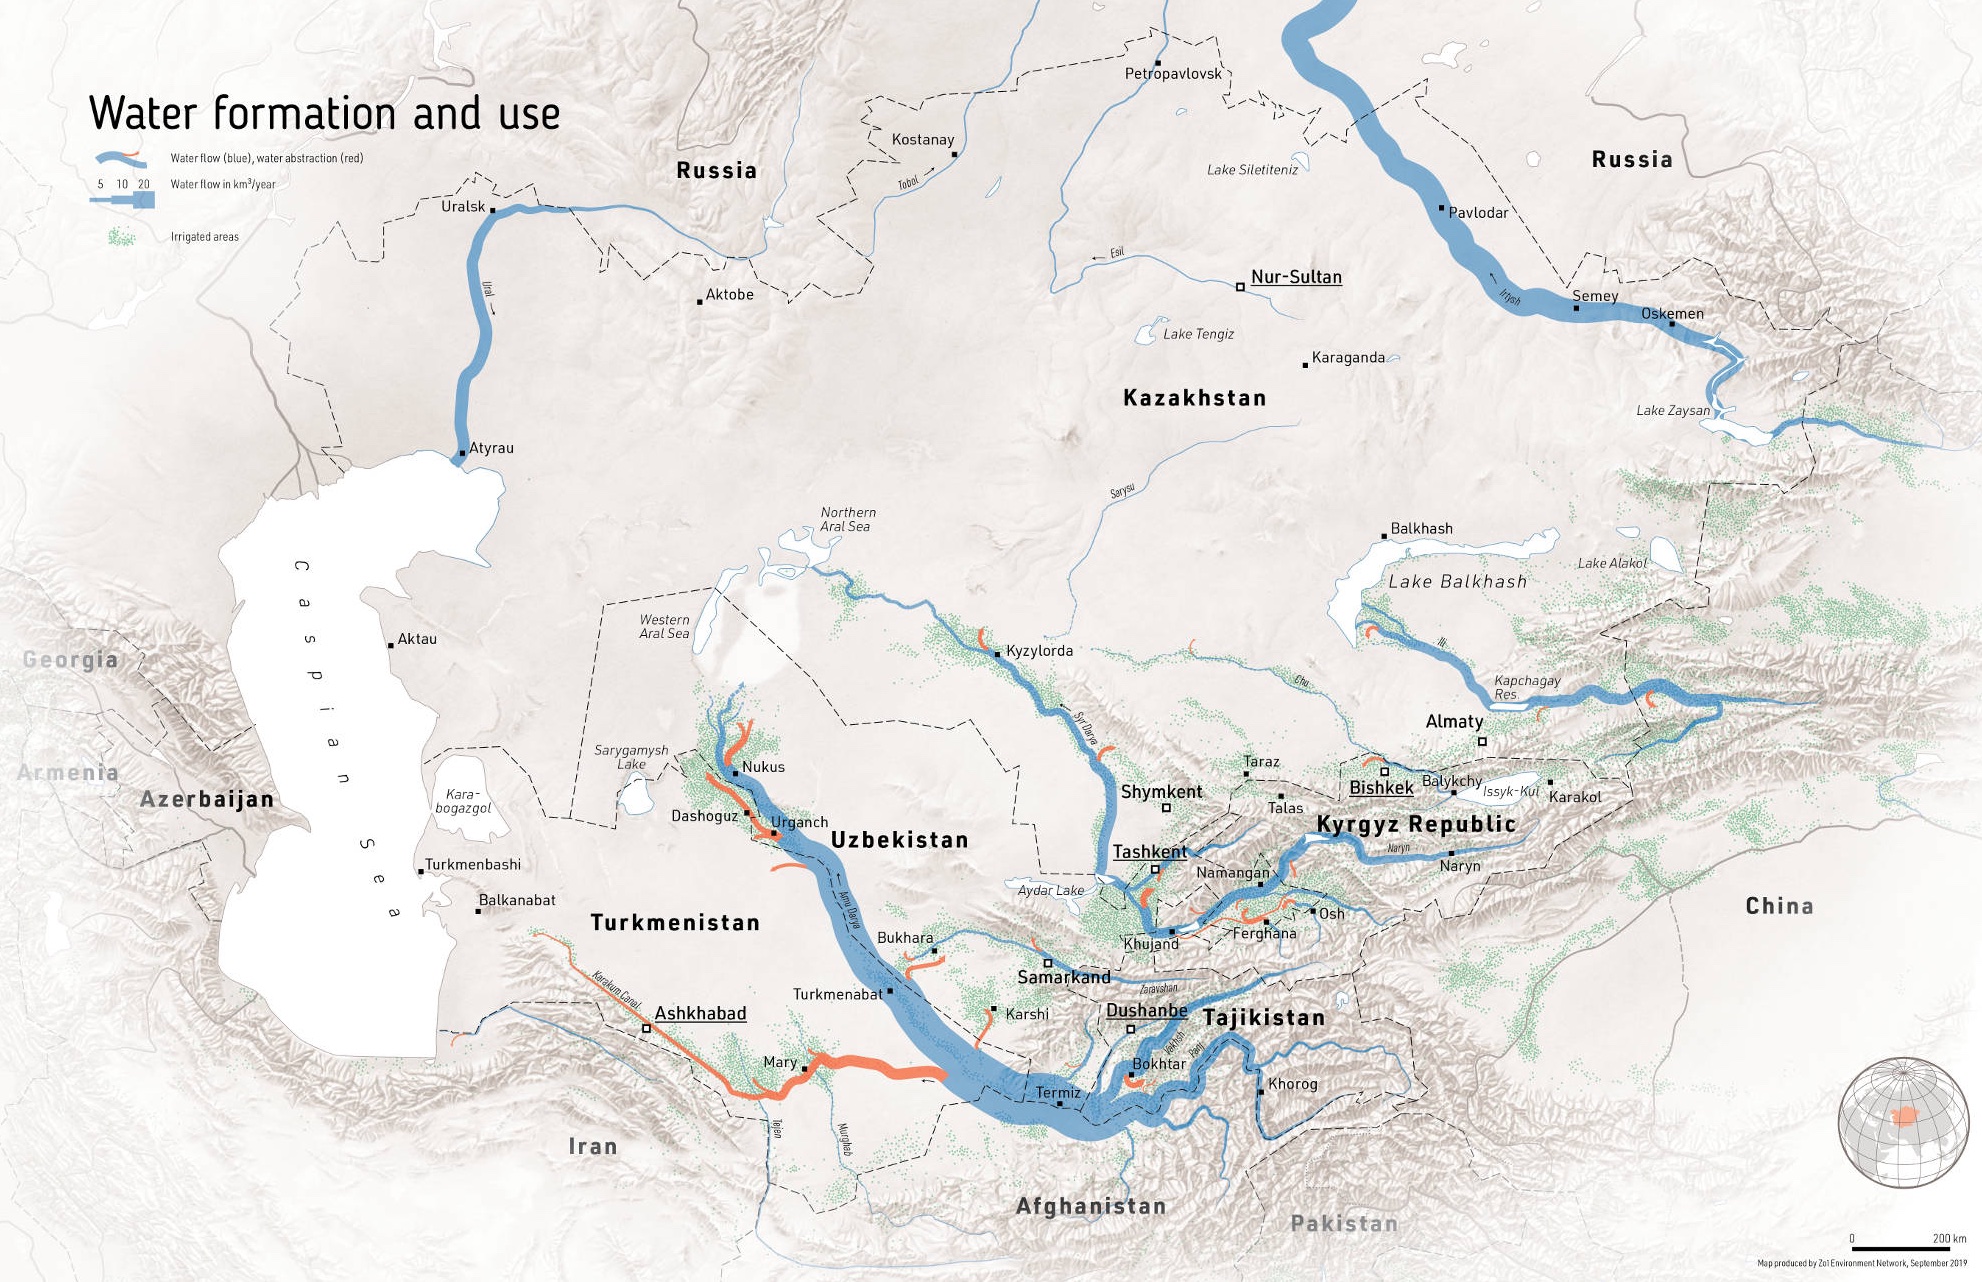 Map highlighting the Central Asian rivers network (rivers are shown in blue color). The dense river network in the mountainous areas starkly contrasts with the sparse one in the plains. Source: Zoï Environment Network.